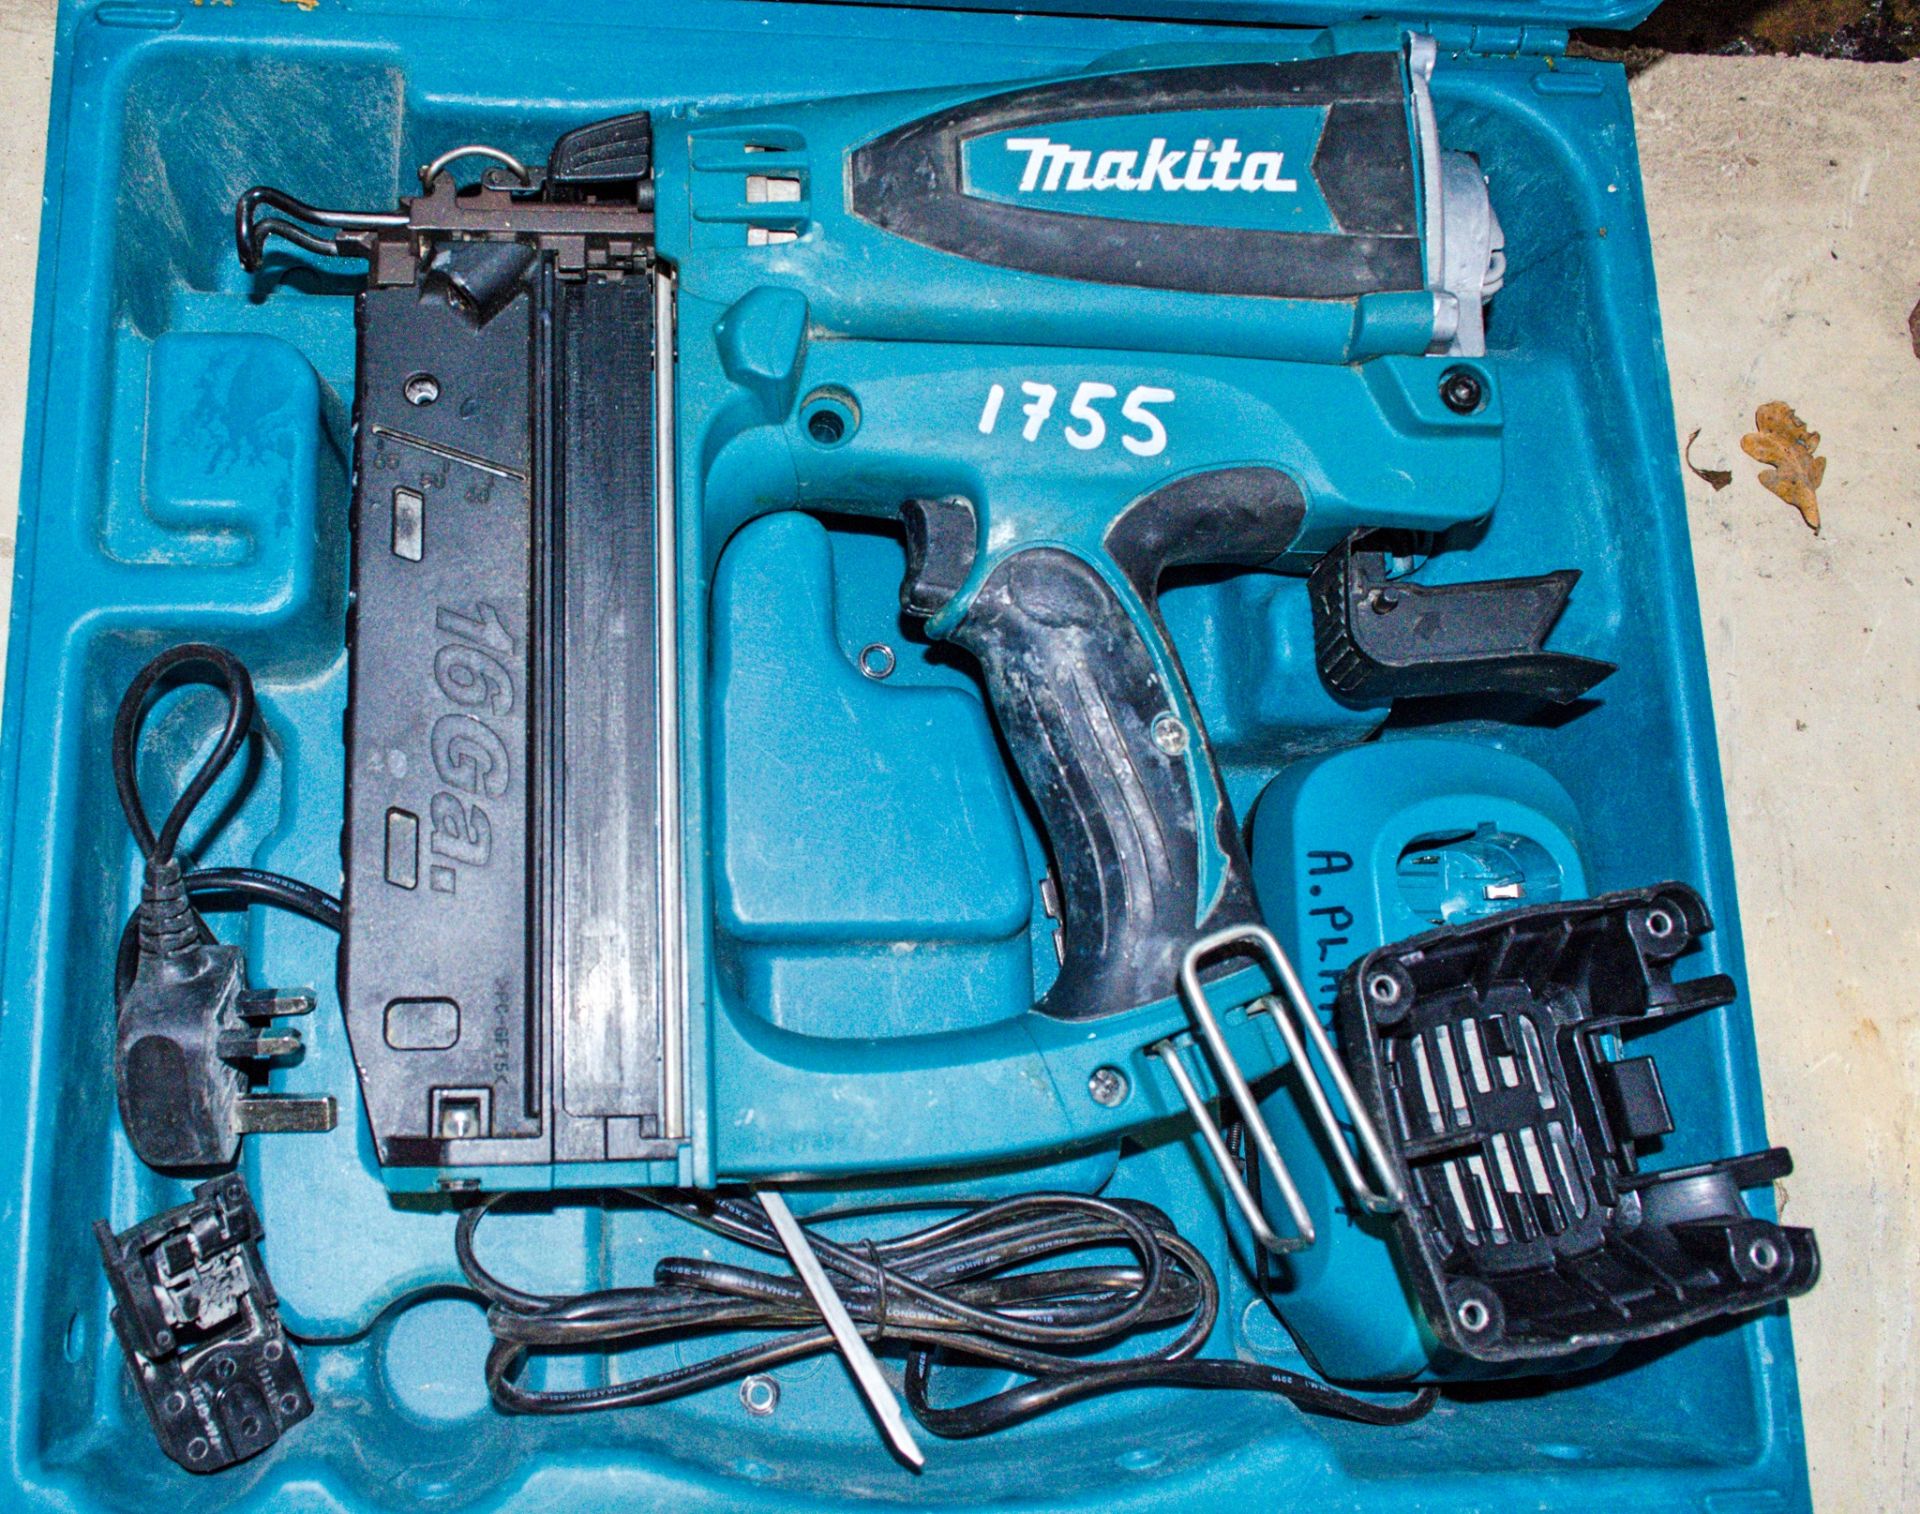 Makita cordless nail gun for spares c/w charger & carry case A847522